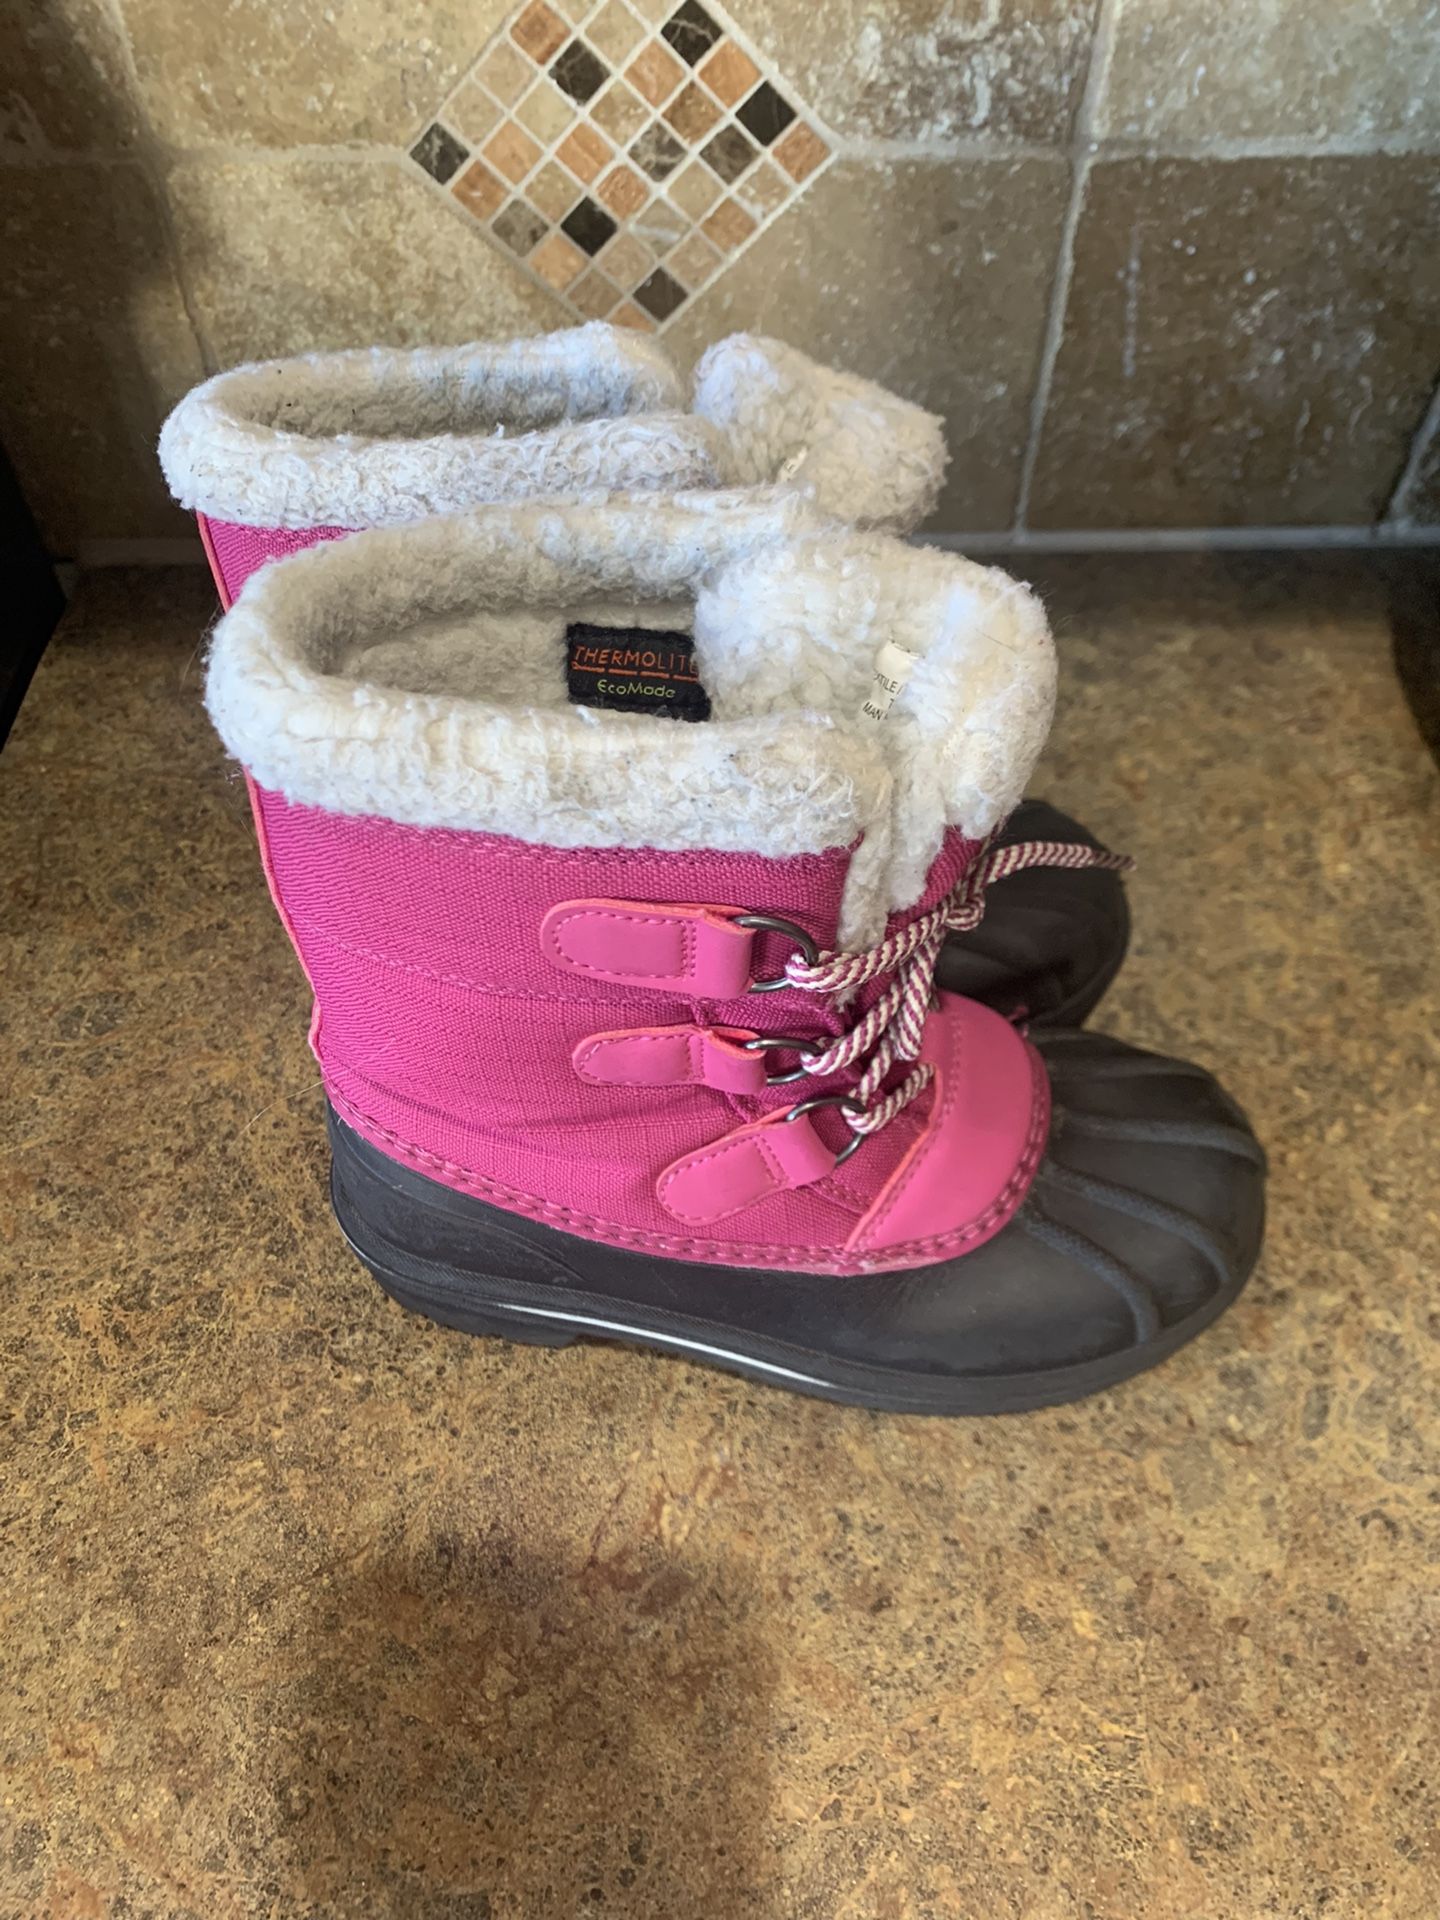 snow boots for girl size 13